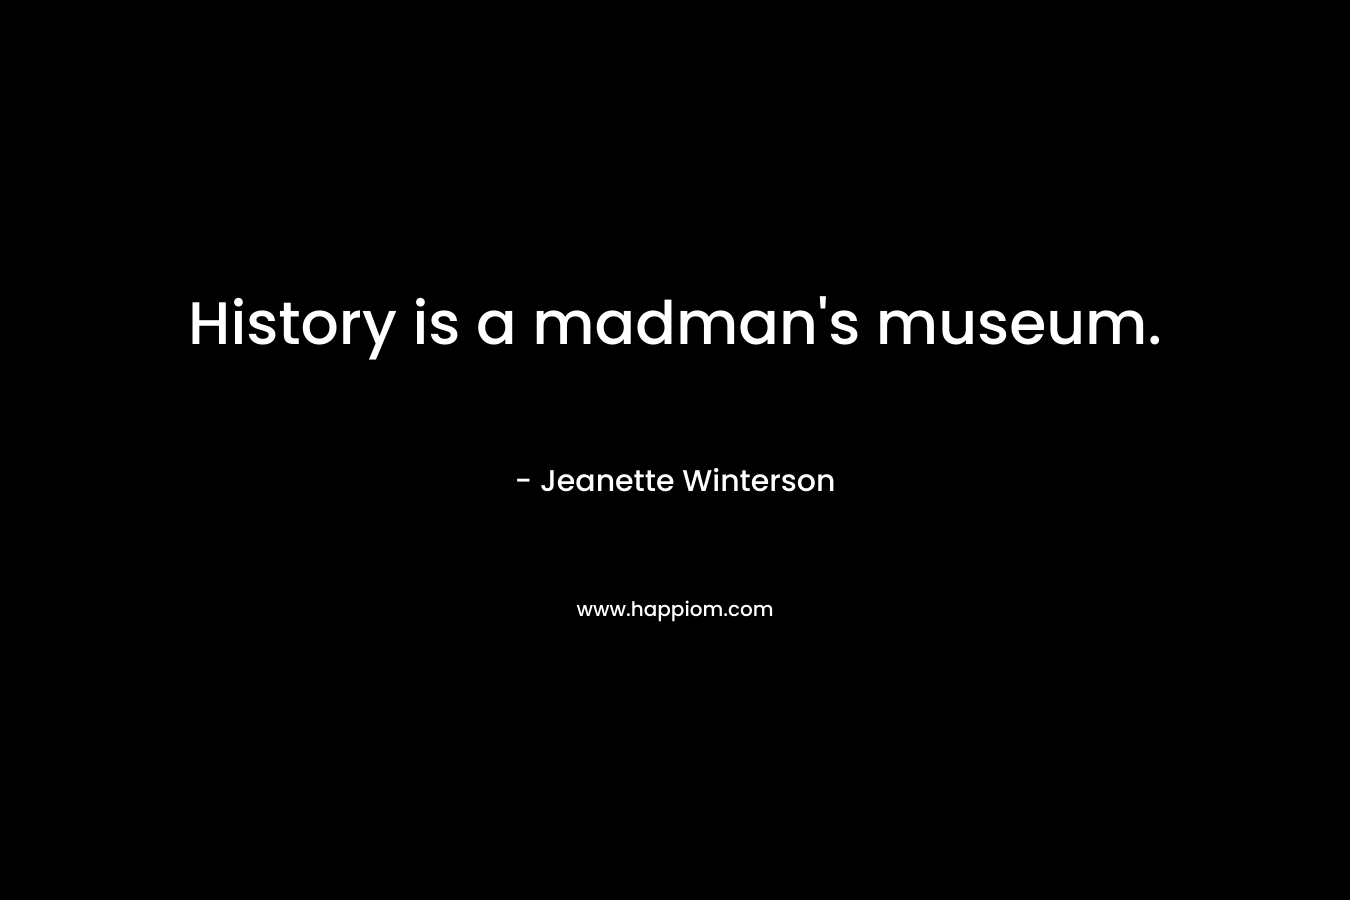 History is a madman’s museum. – Jeanette Winterson